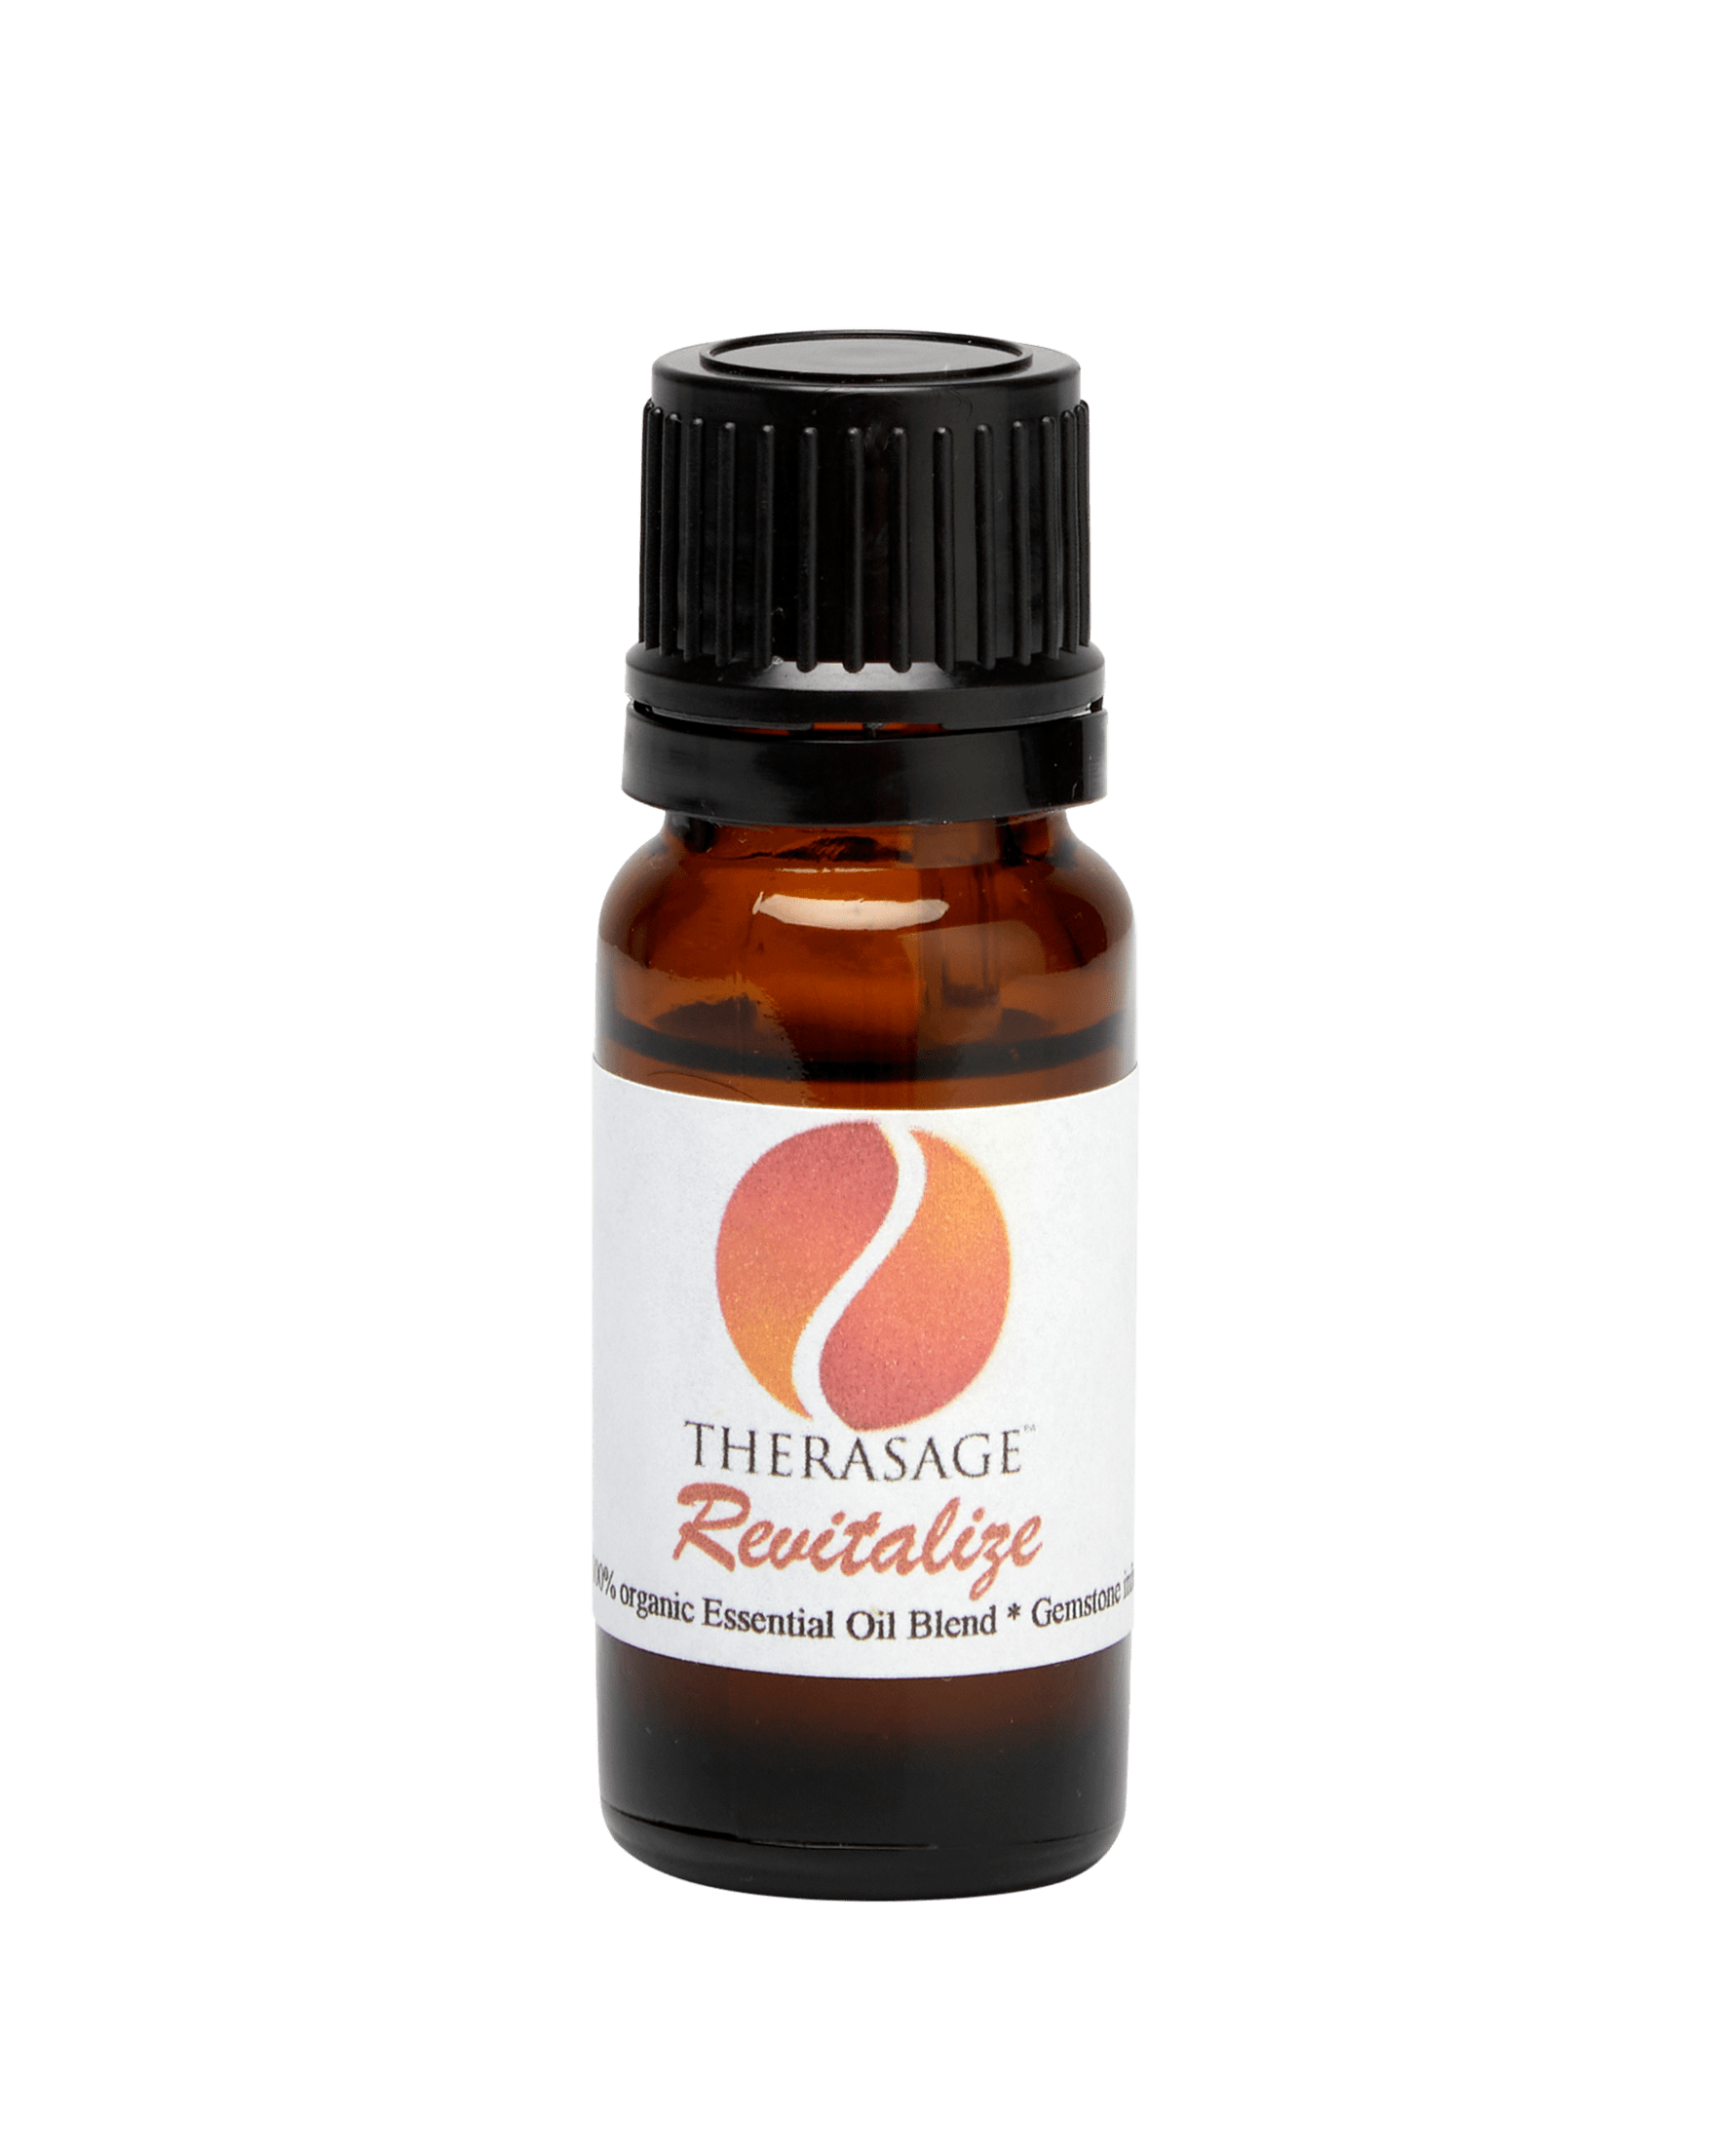 Therasage All Revitalize Therasage TheraEssential Oil Blend